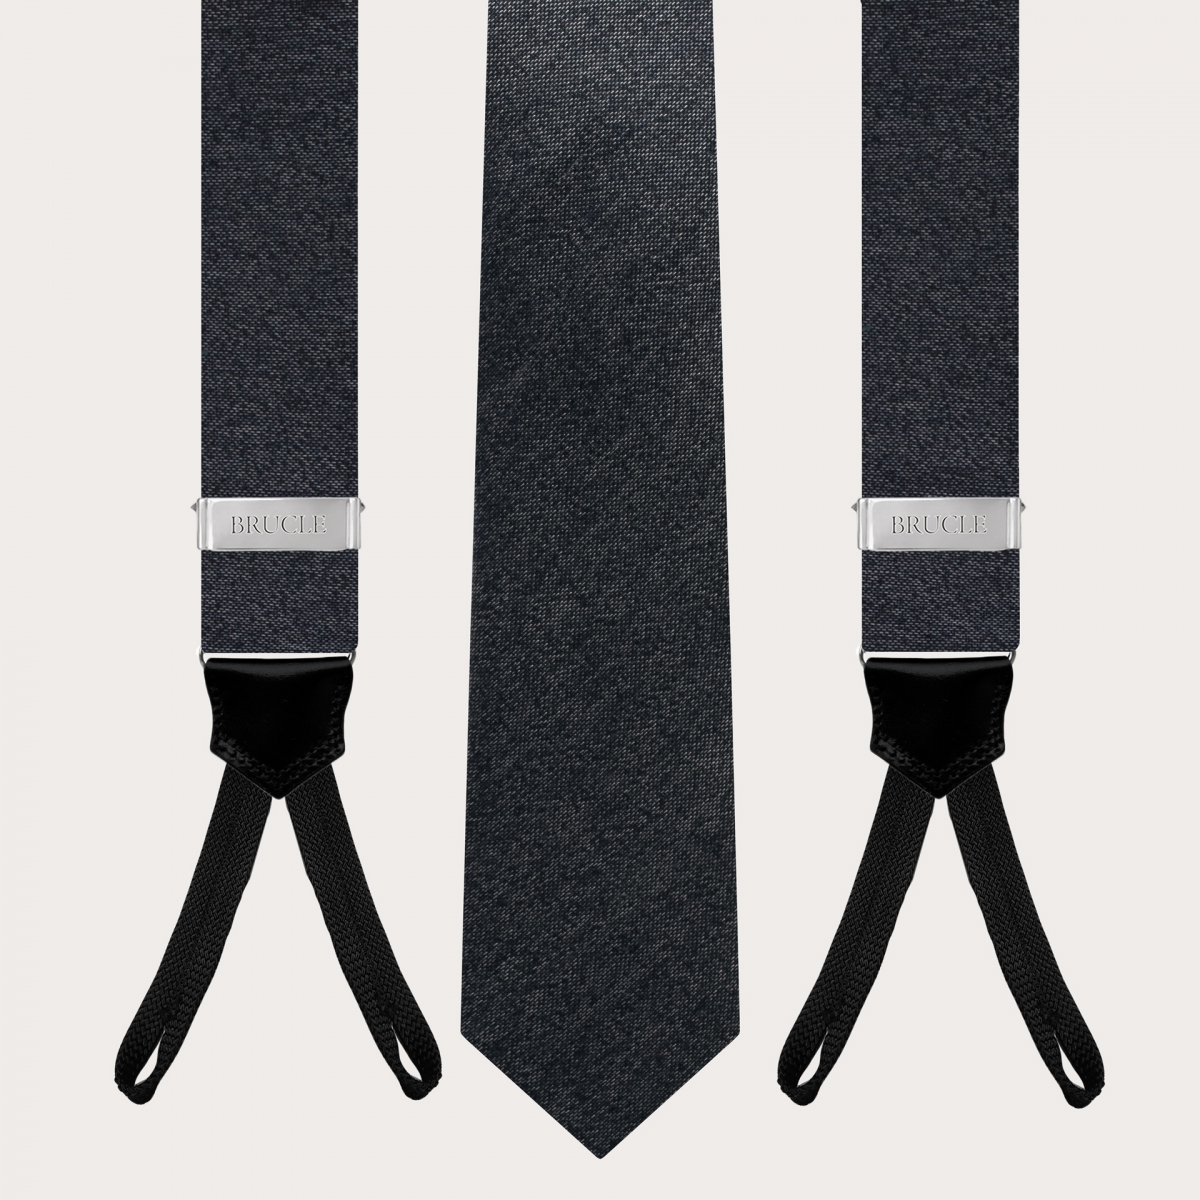 BRUCLE Refined men's set of suspenders with buttonholes and necktie, grey melange